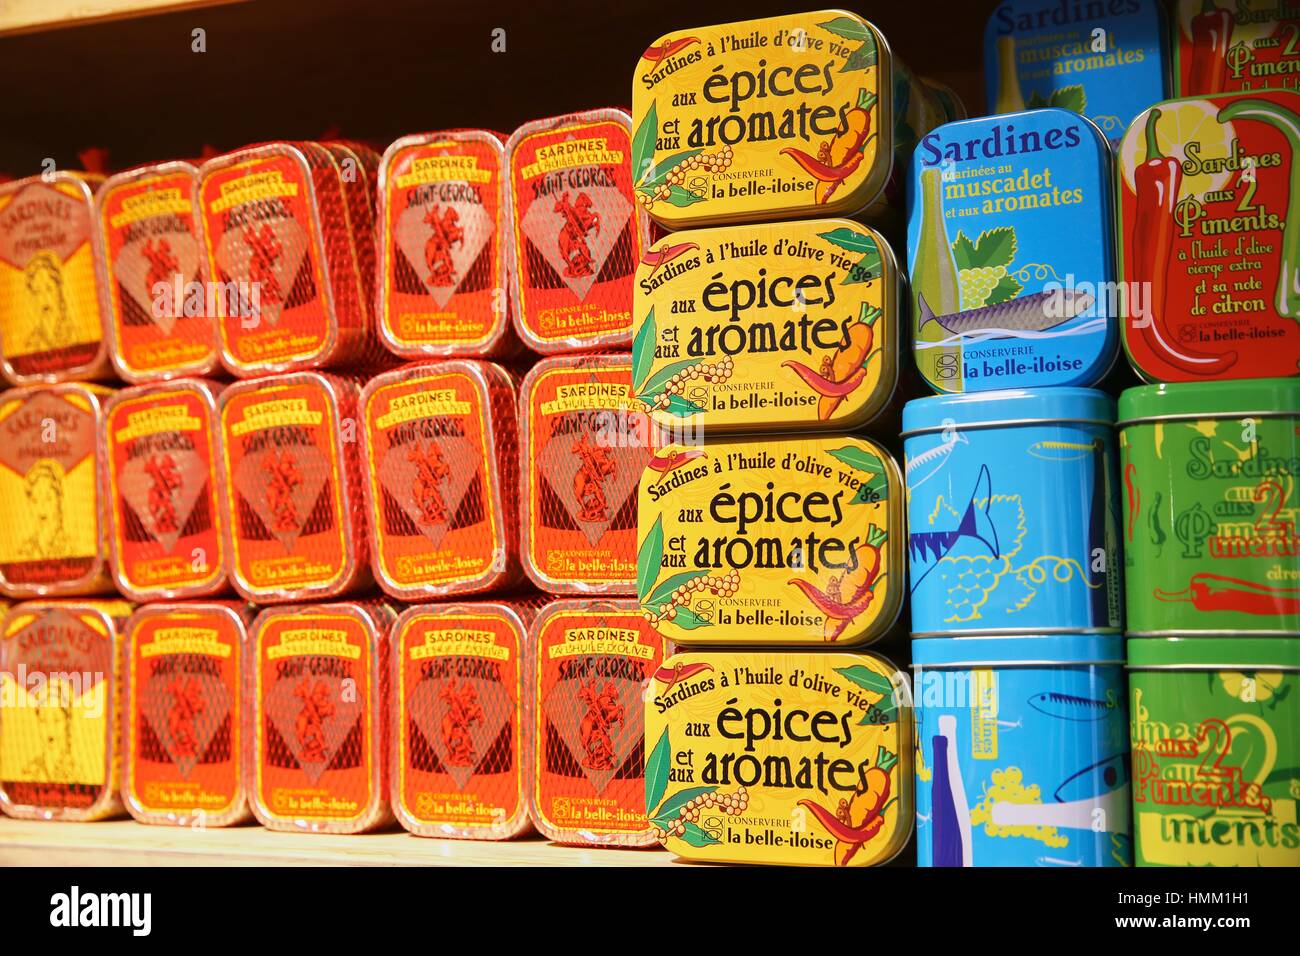 Canned fish shop, Quimper, Bretagne, Brittany, France Stock Photo